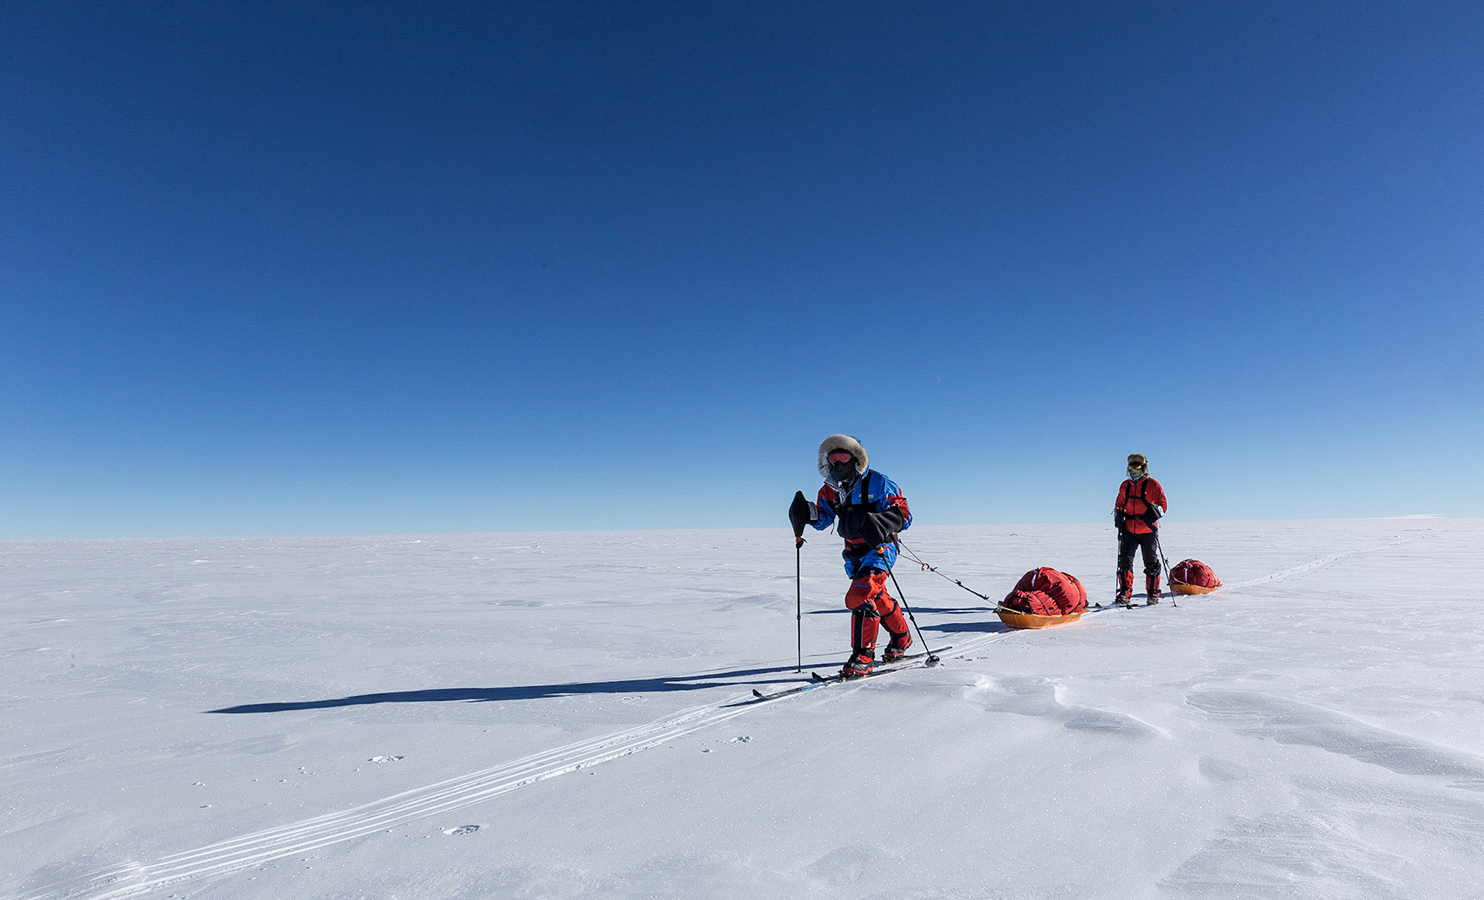 Skier tow sleds across the vast expanse of interior Antarctica to the South Pole.